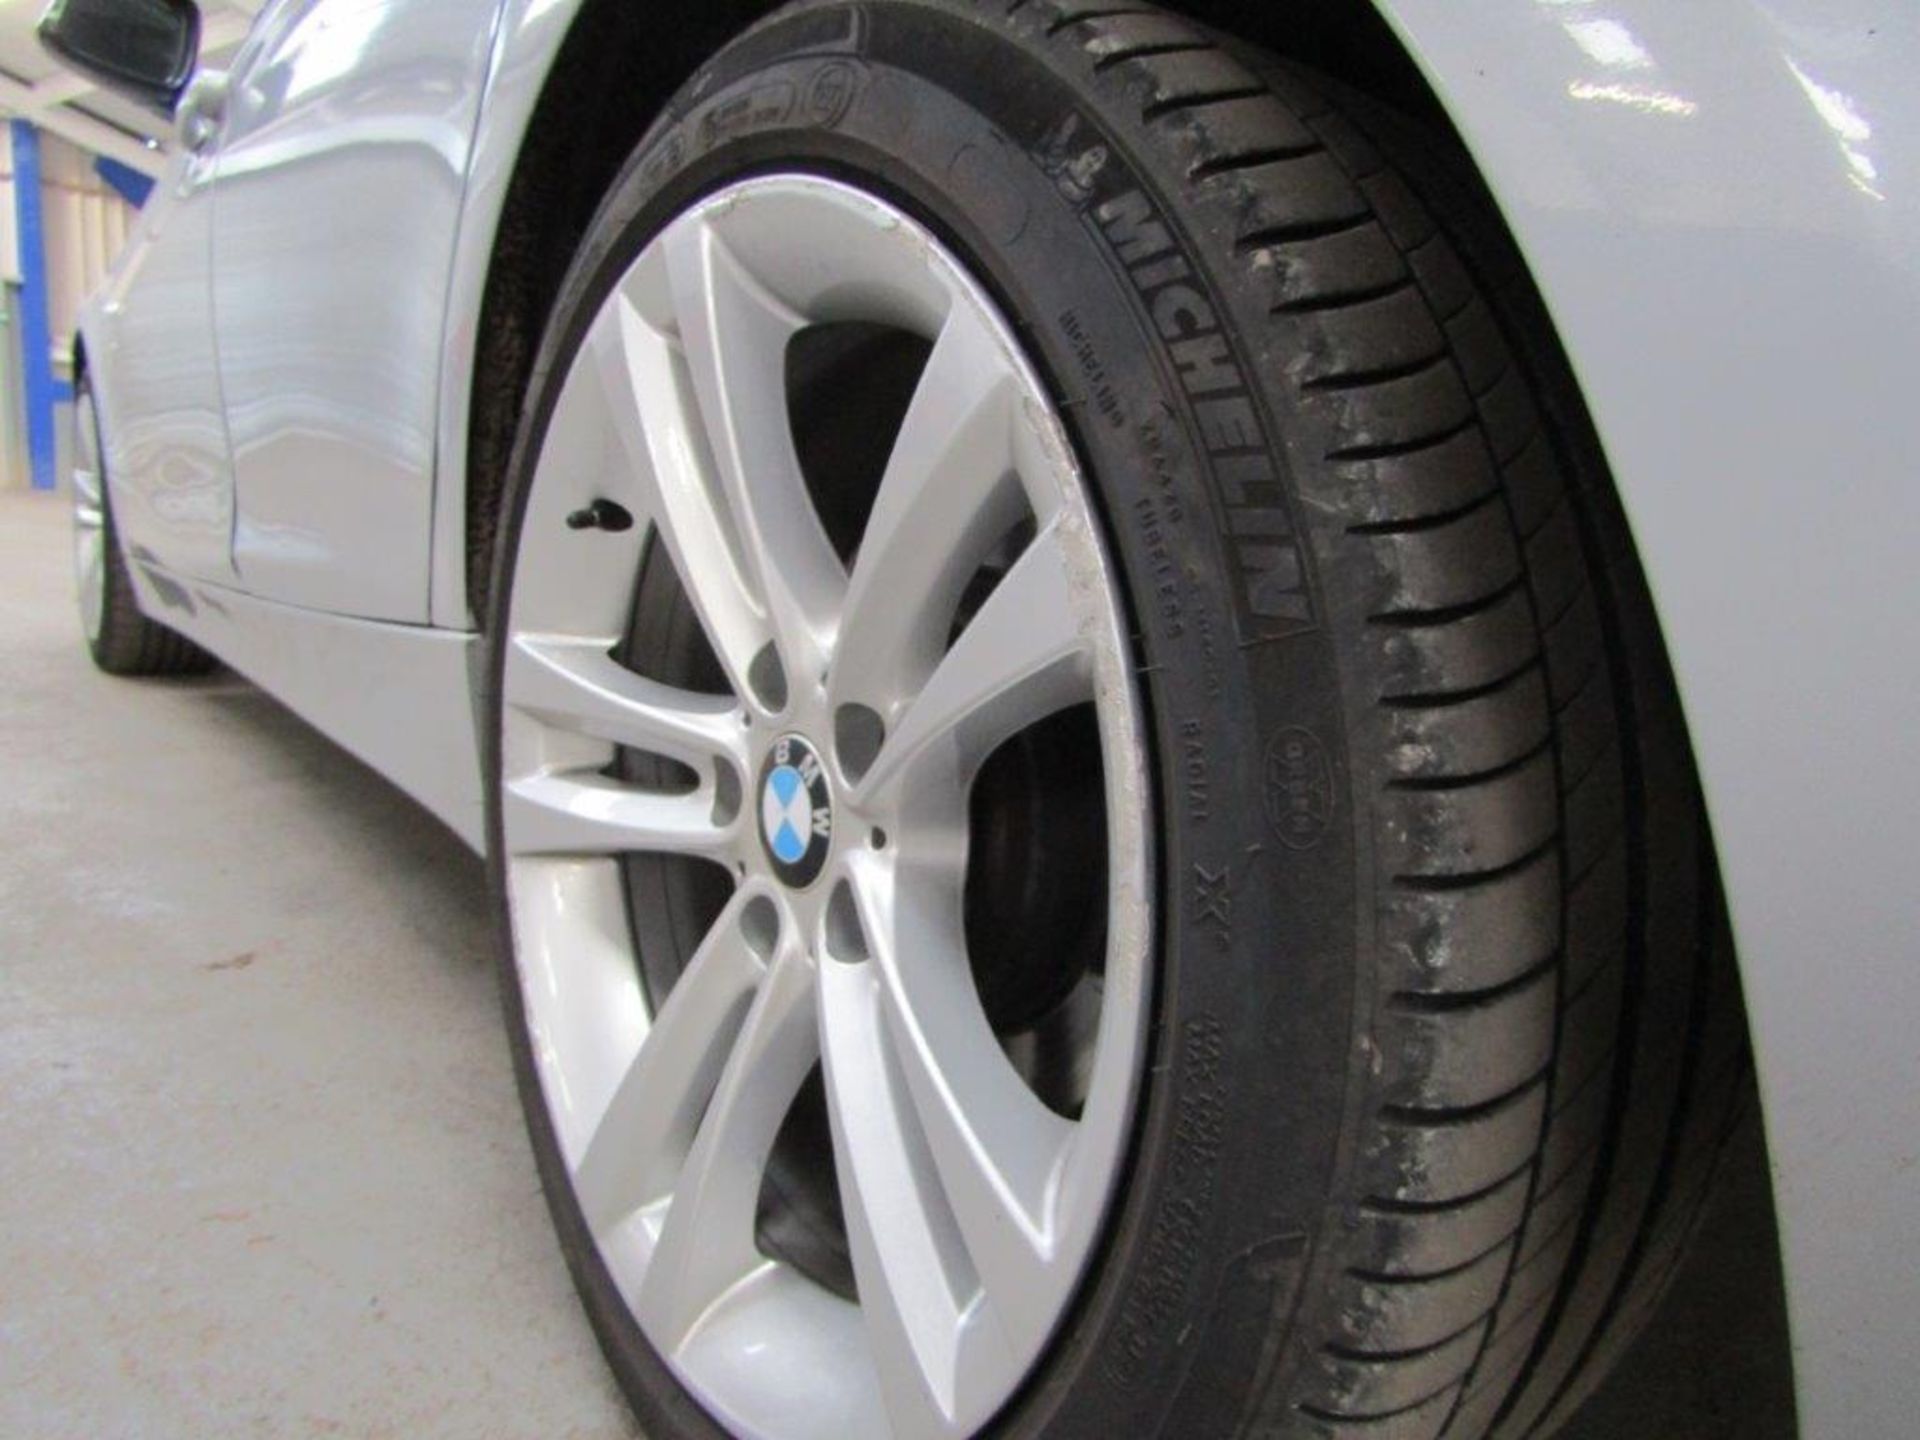 62 12 BMW 320D Sport Touring - Image 10 of 29